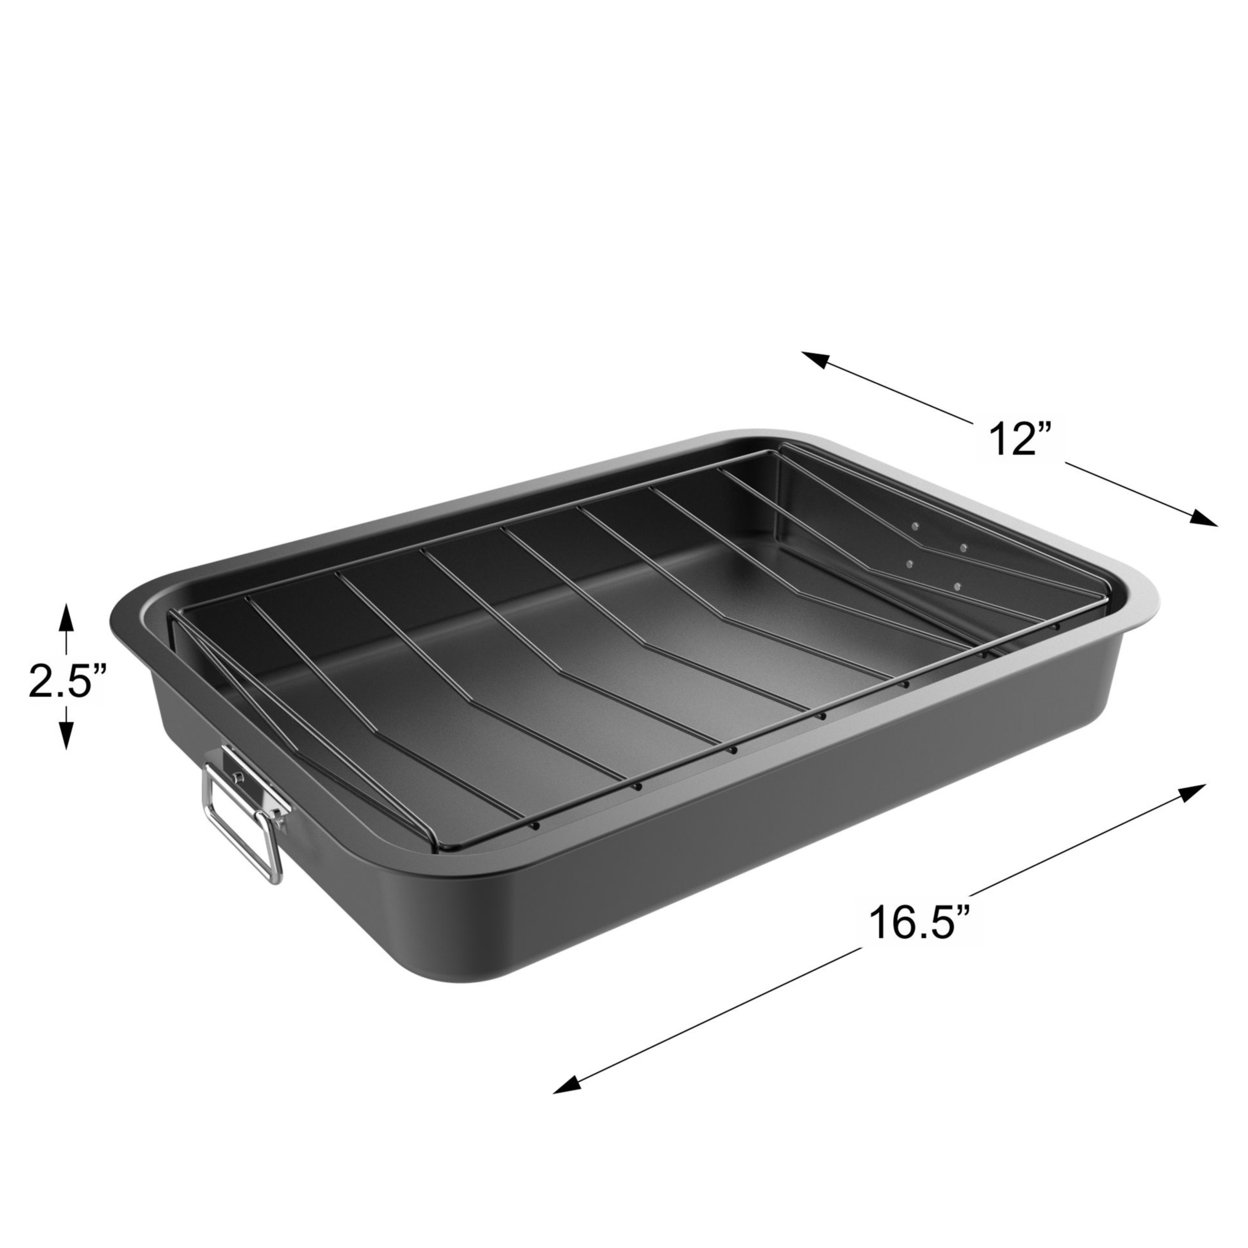 Roasting Pan With Angled Rack-Nonstick Oven Roaster And Removable Tray-Drain Fat And Grease For Healthier Cooking-Kitchen Cookware